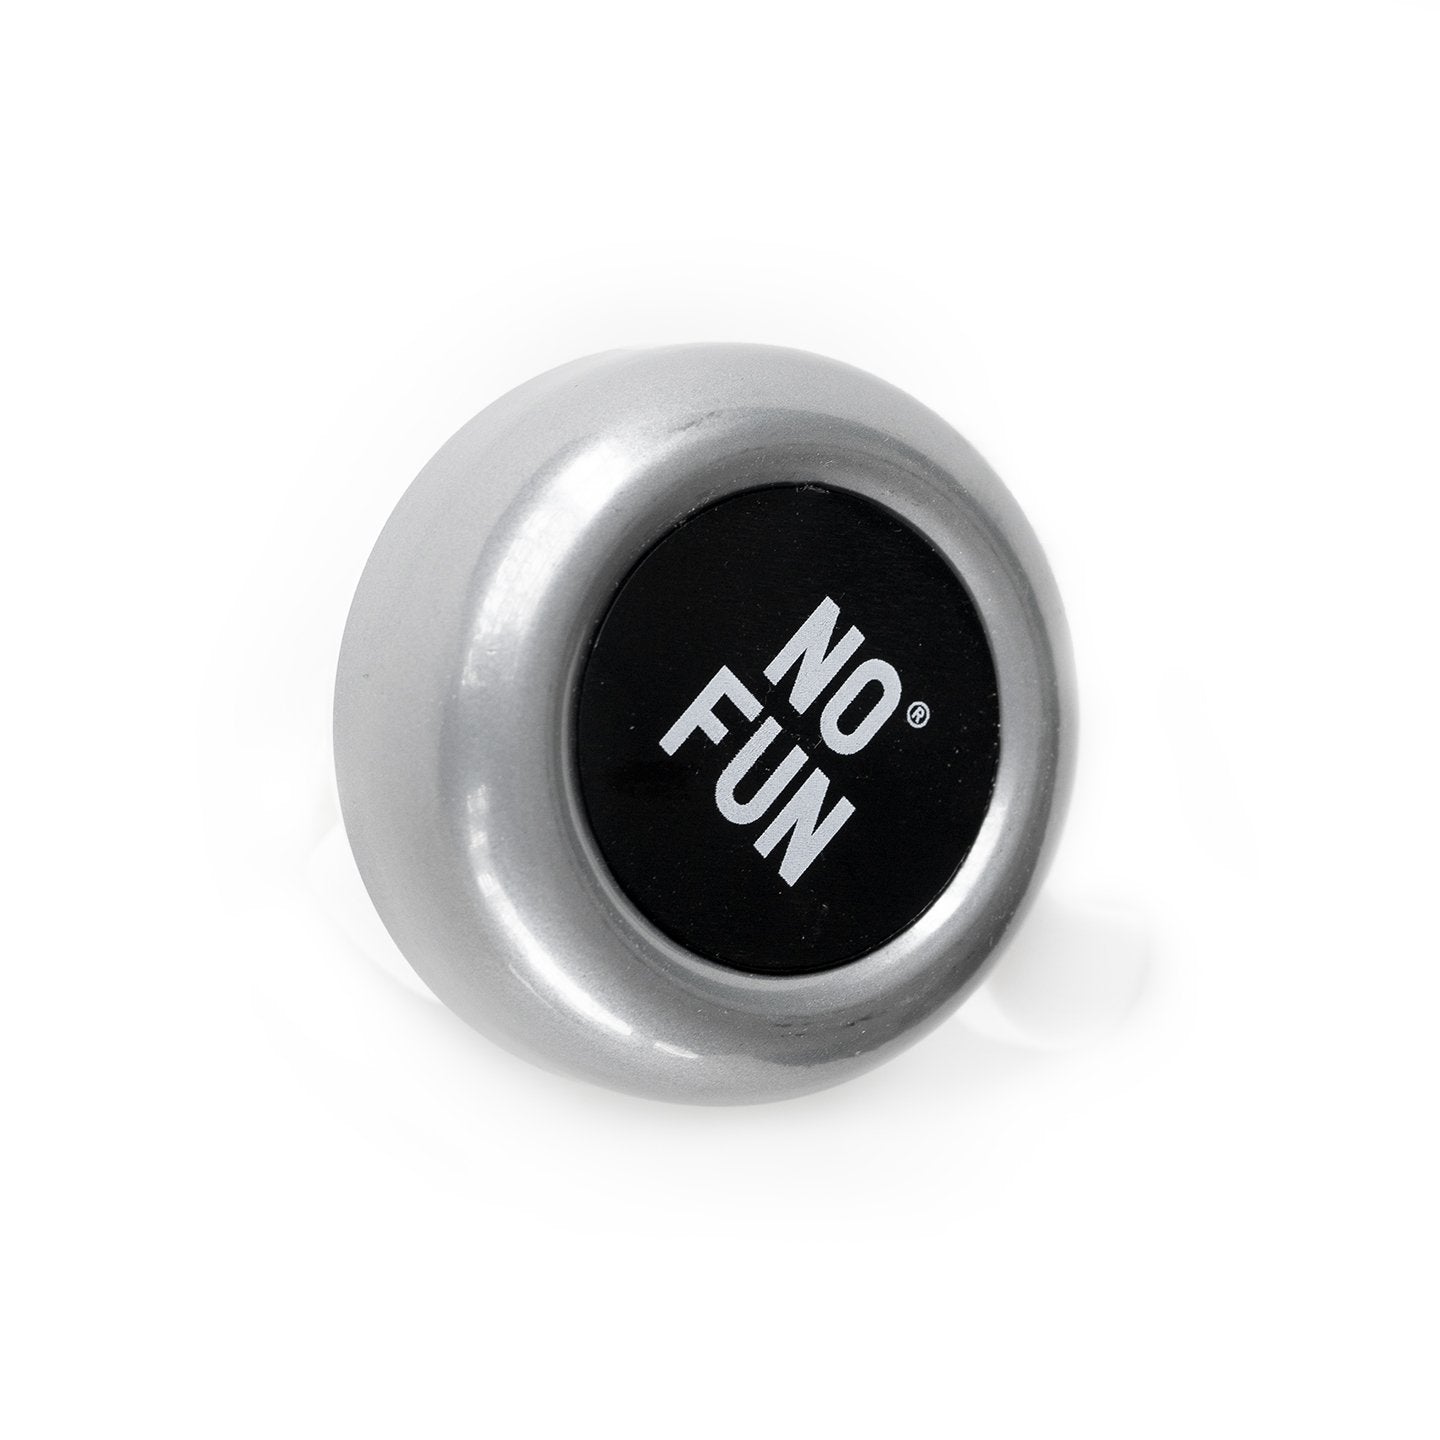 Official "NO FUN®" bicycle bell. Bell is fabricated with metal and plastic, and features a black disk in the center with white "NO FUN®" branding.